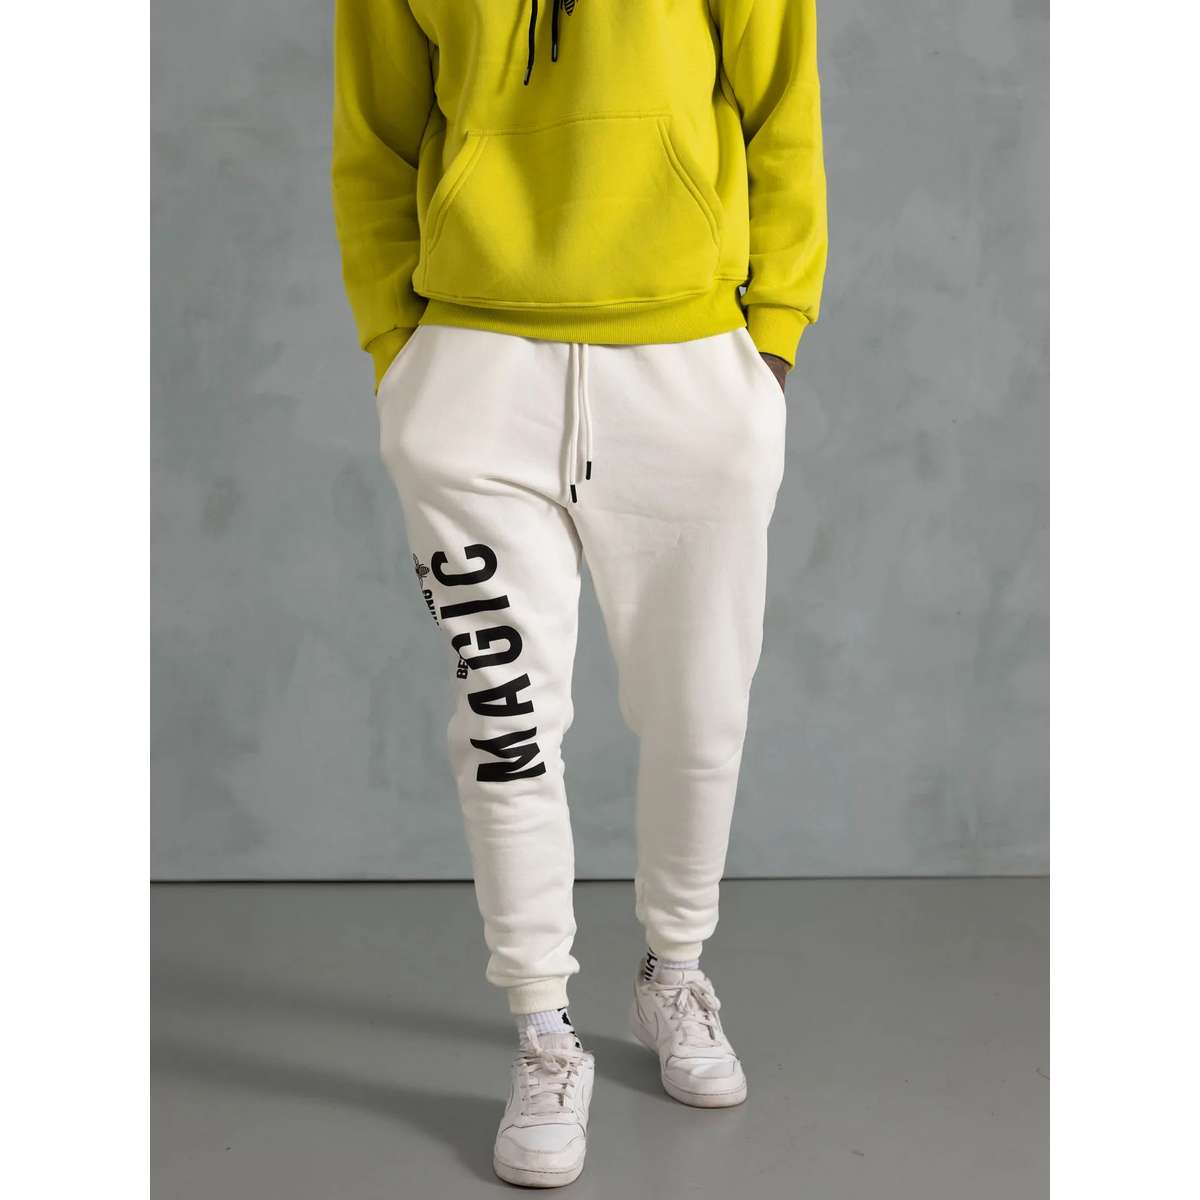 MAGICBEE FRONT LOGO PANTS - MB22406 OFF WHITE